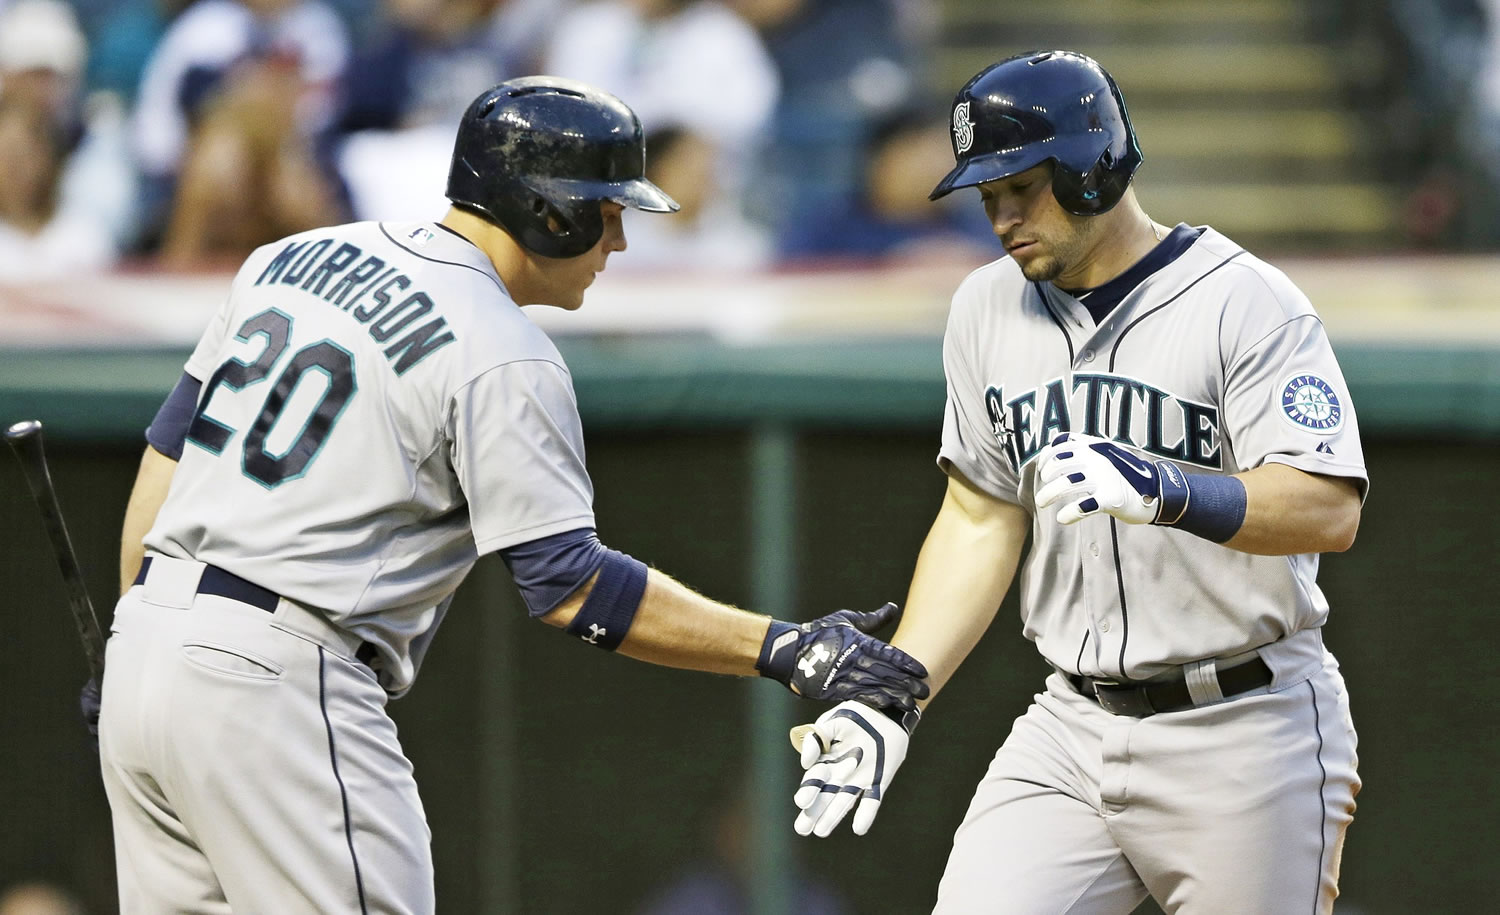 Seattle Mariners' Mike Zunino, right, is congratulated by Logan Morrison after Zunino hit a solo home run off Cleveland Indians starting pitcher Trevor Bauer in the fifth inning Tuesday in Cleveland.